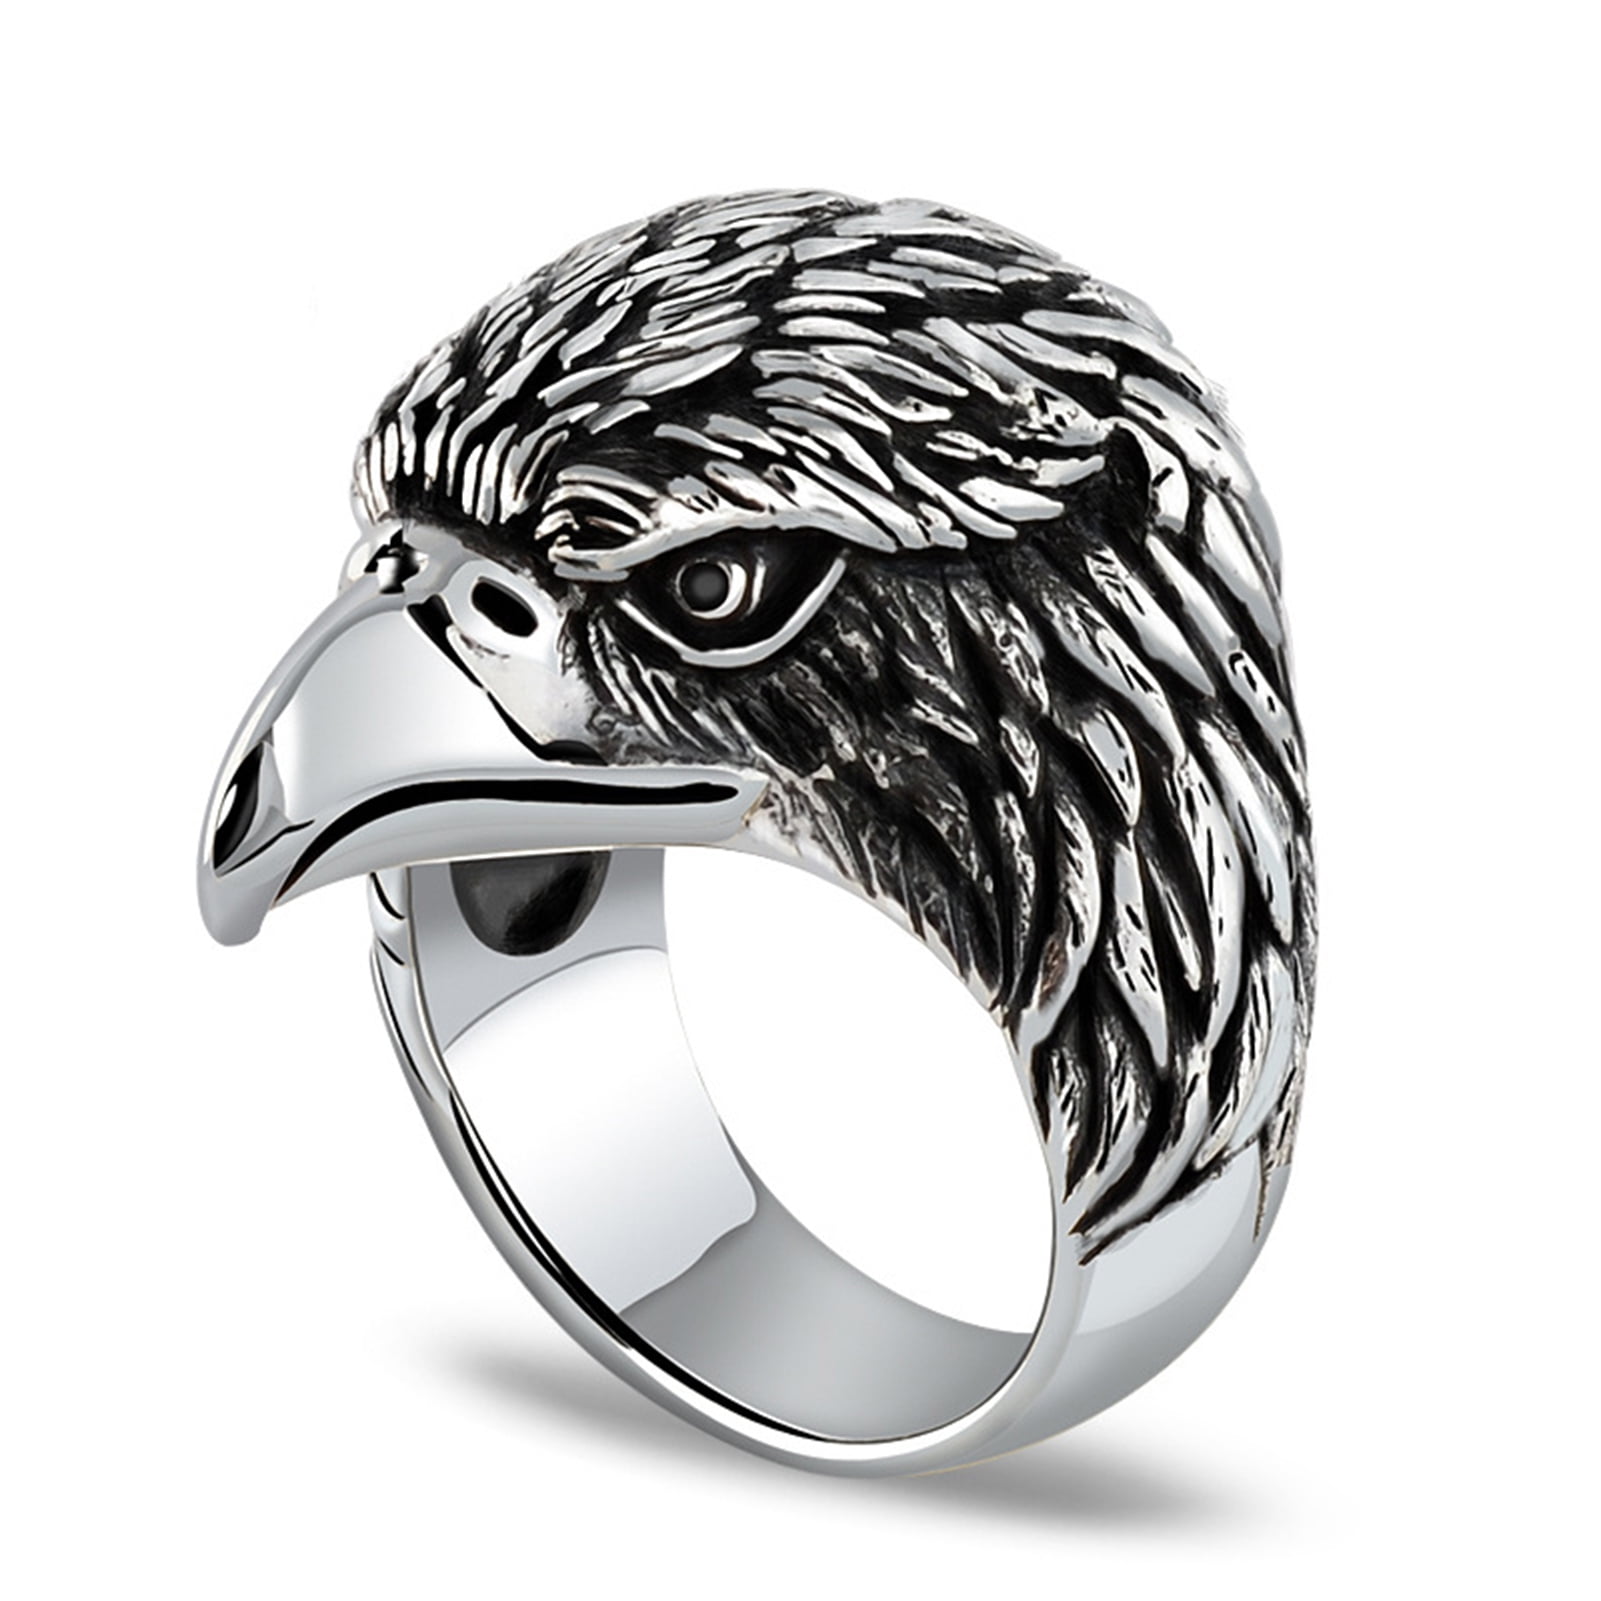 Mens Silver Gold Stainless Steel Ring Flying Eagle Biker Gothic Punk Band Ring 